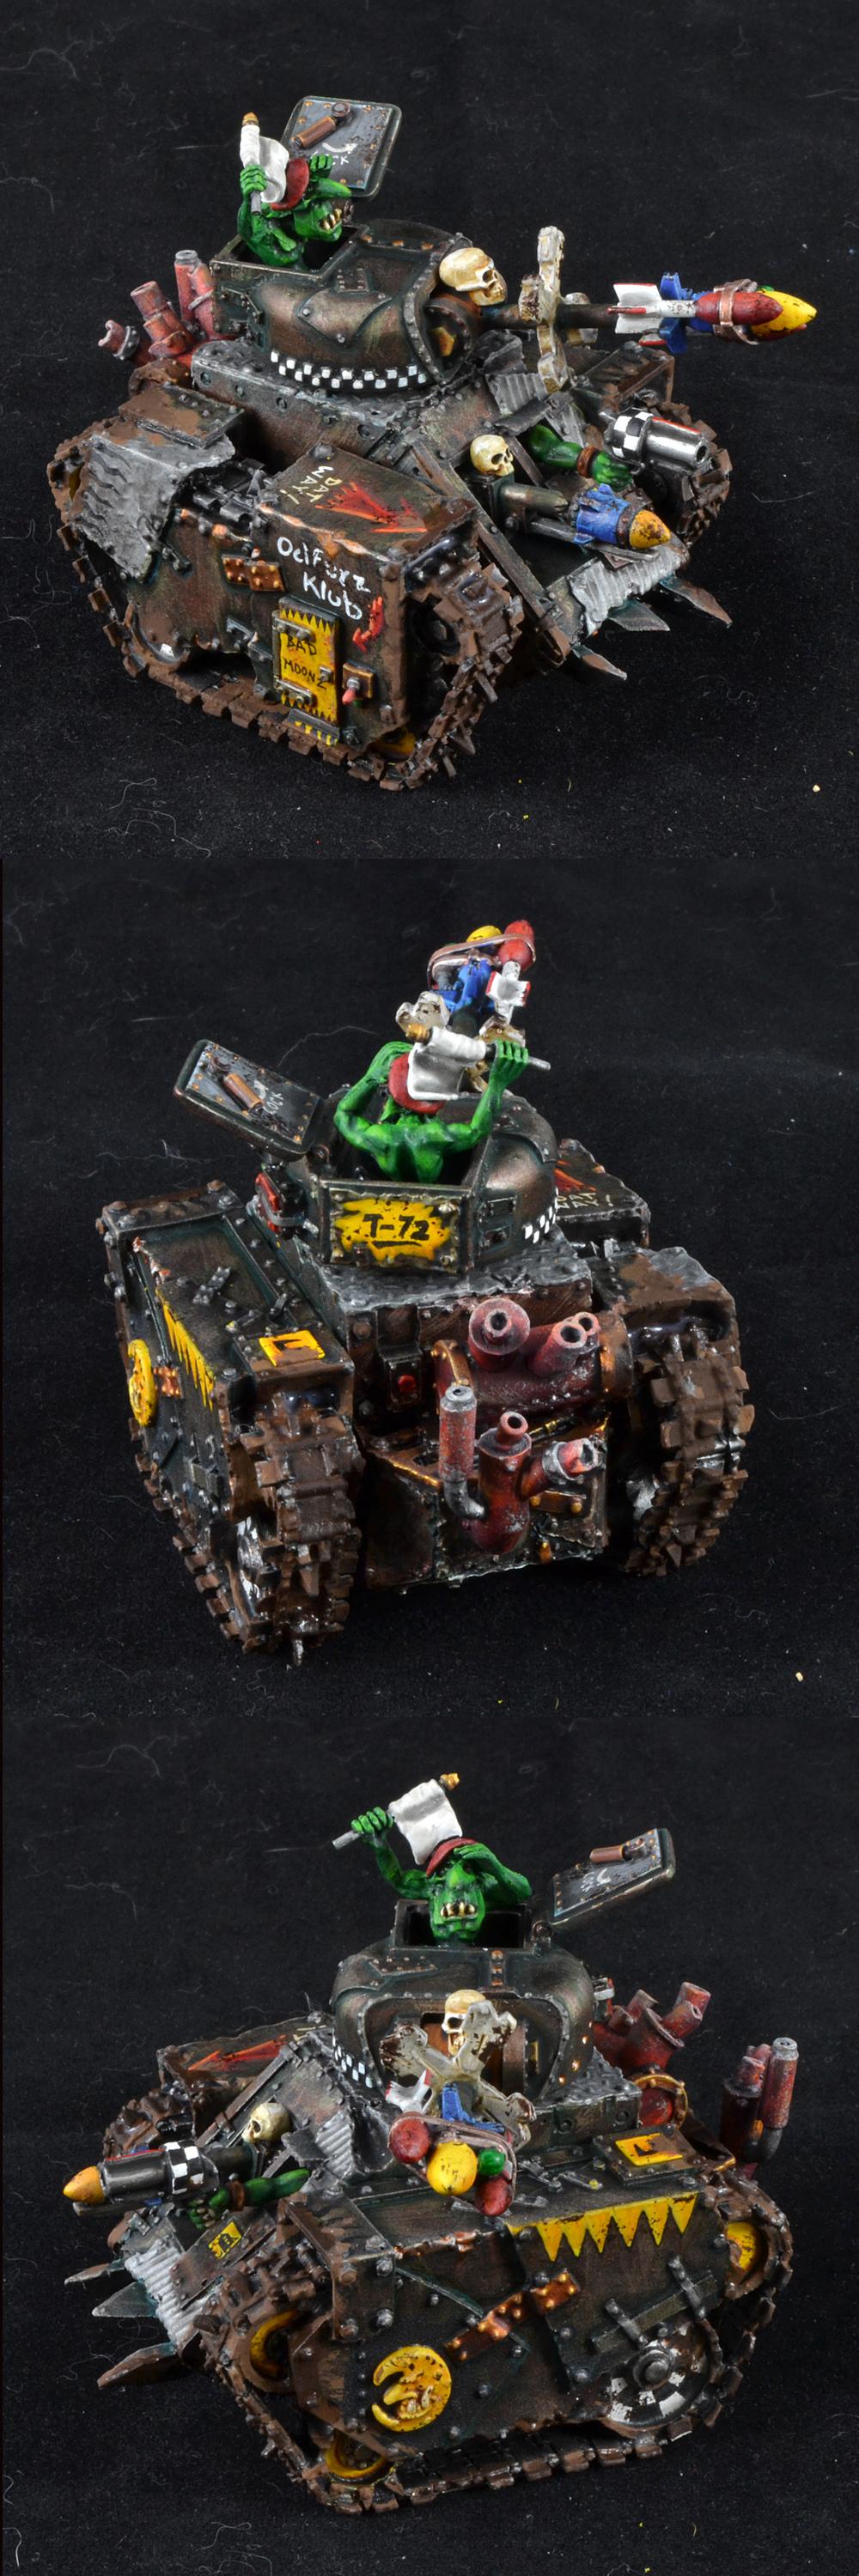 Bad Moons, Forge World, Grot Tank, Orks, Warhammer 40,000